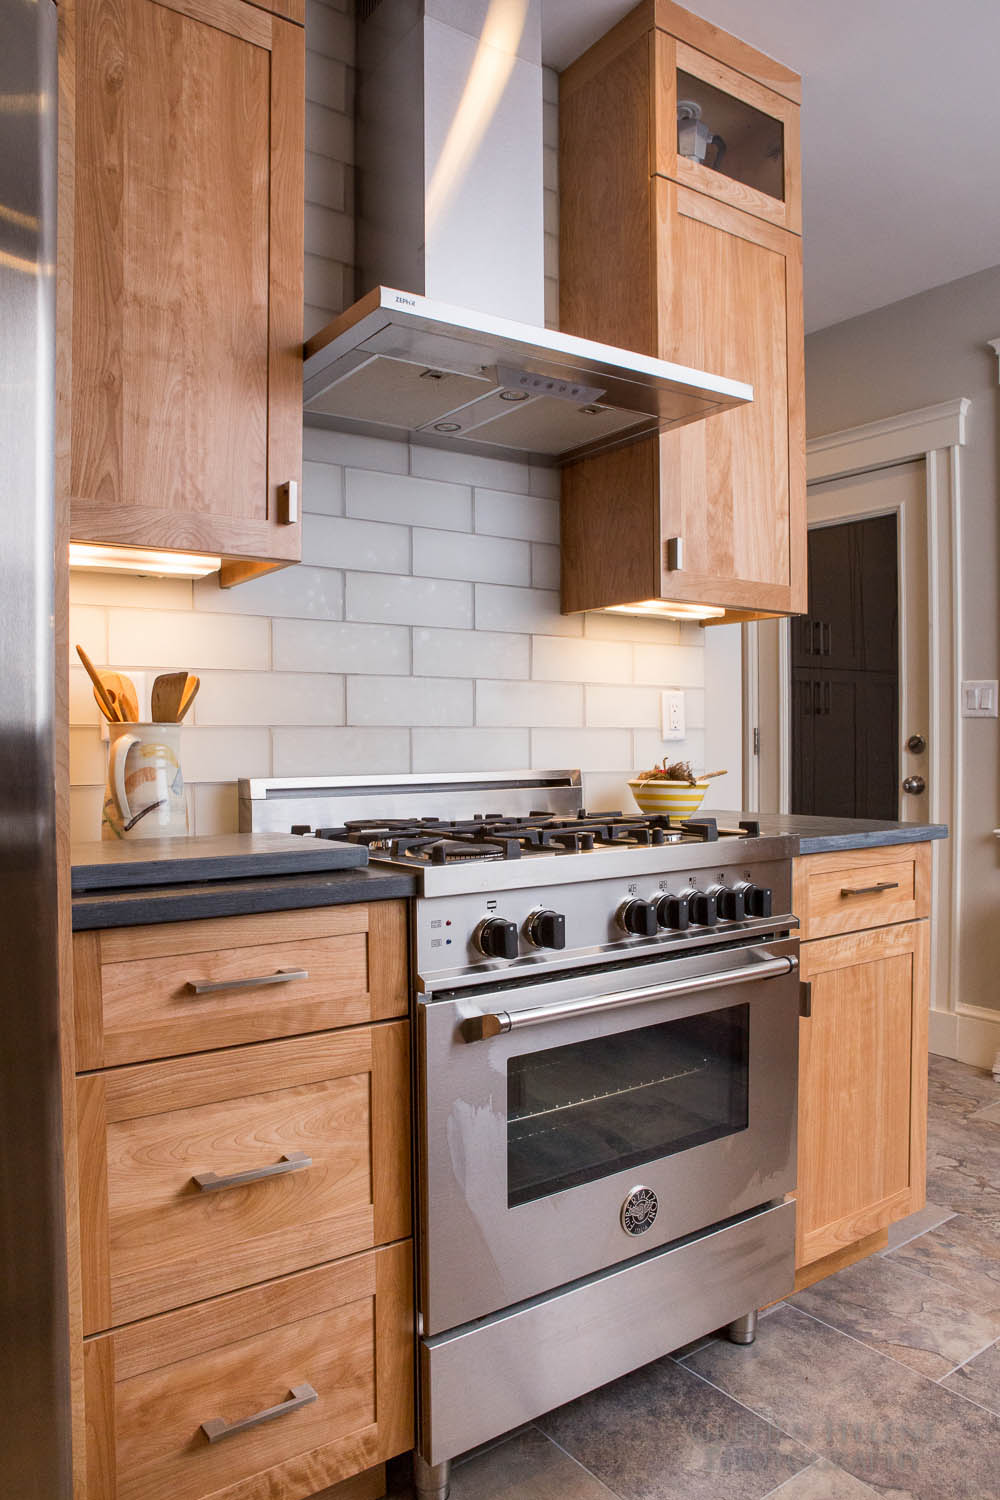 Kitchens from Boston Building Resources — Boston Building Resources